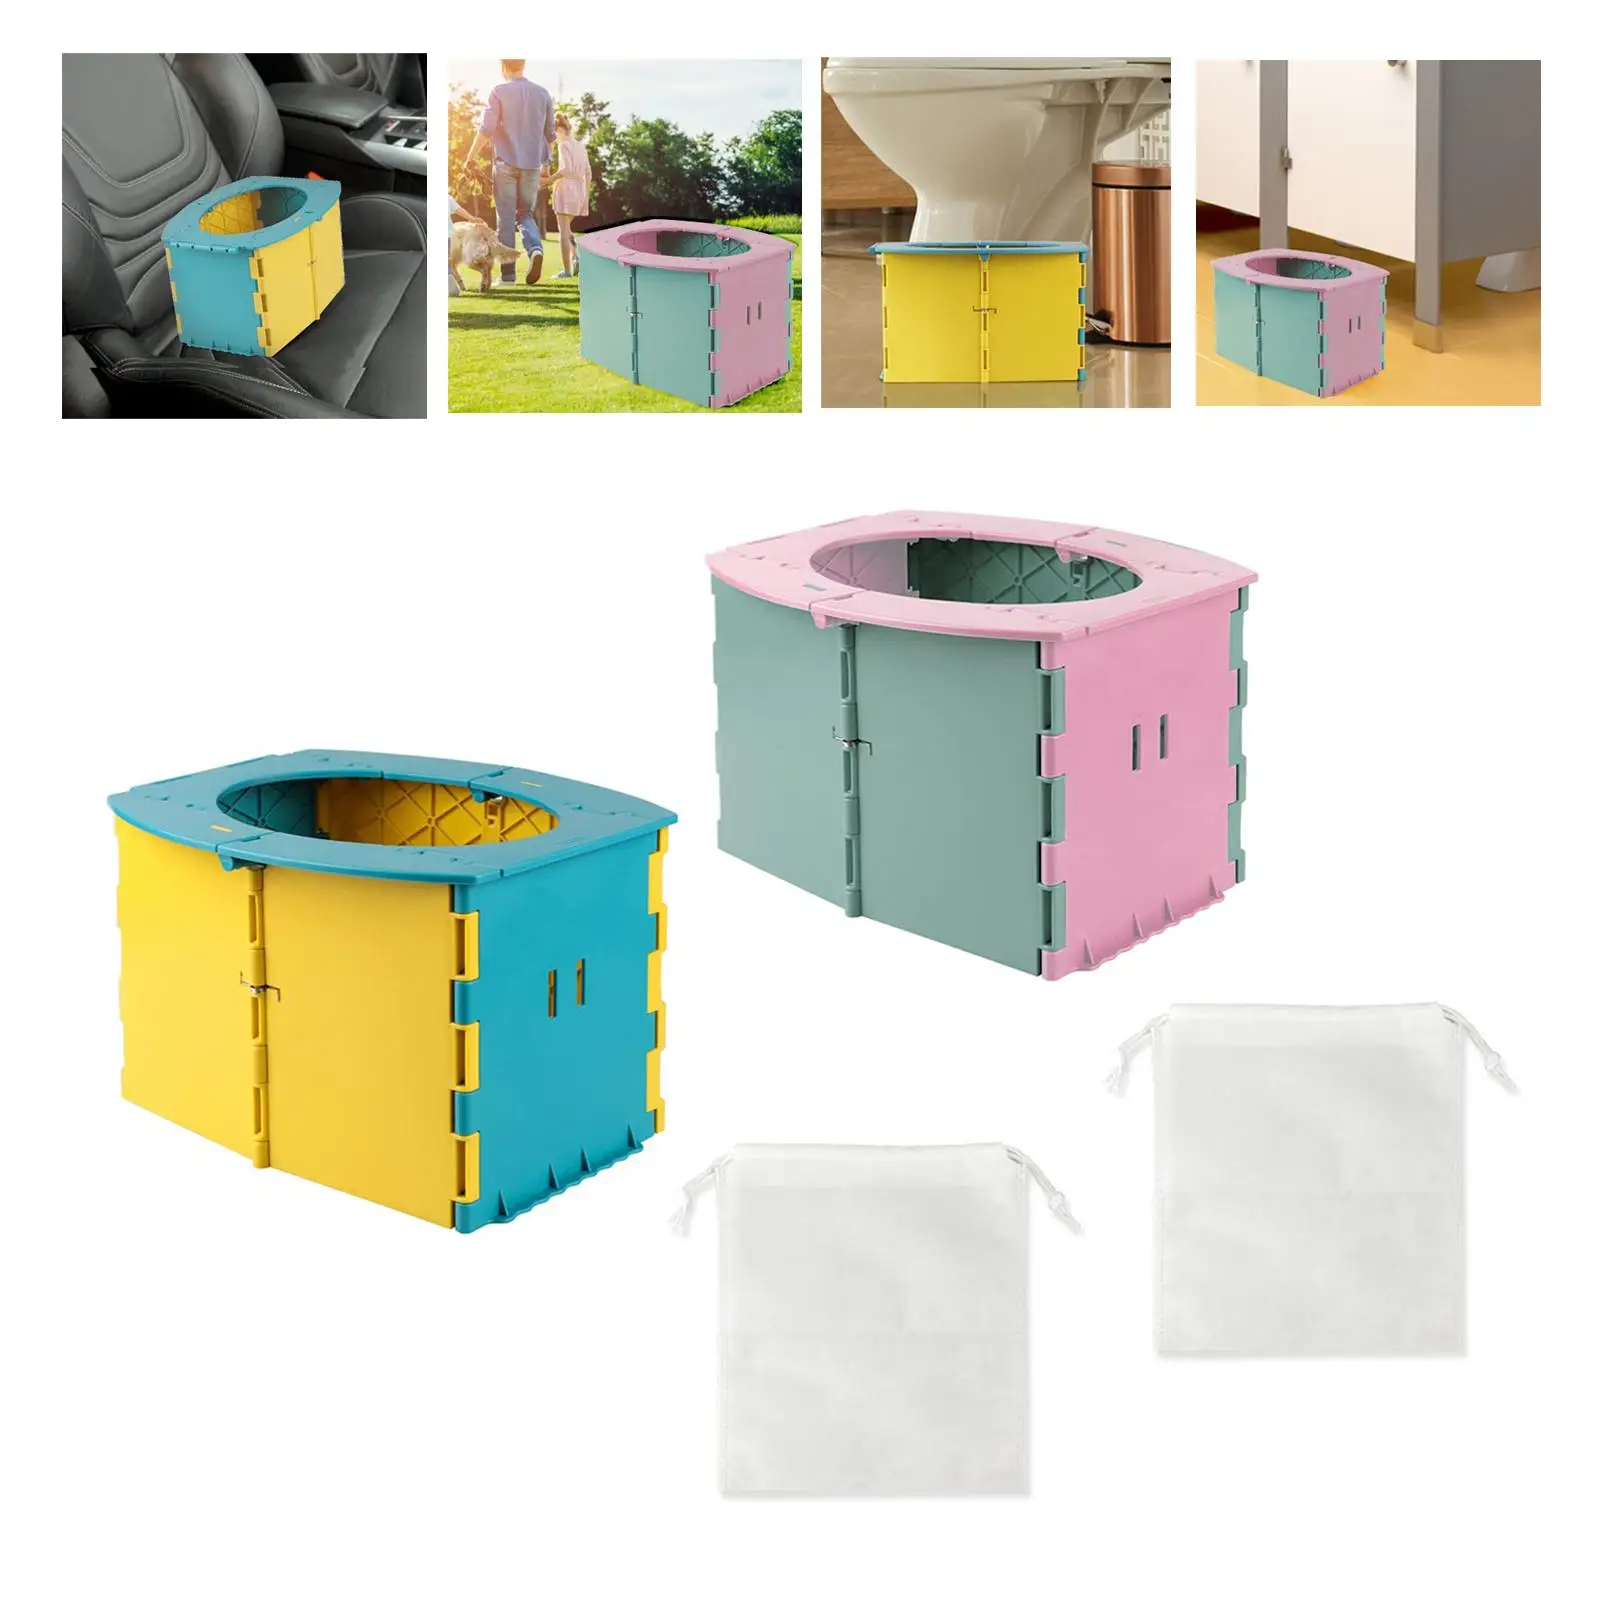 Lightweight Travel Toilet Potty Chair with Replacement Bags Bucket Toilet Car Toilet for Boat Car Camping Tent Emergency